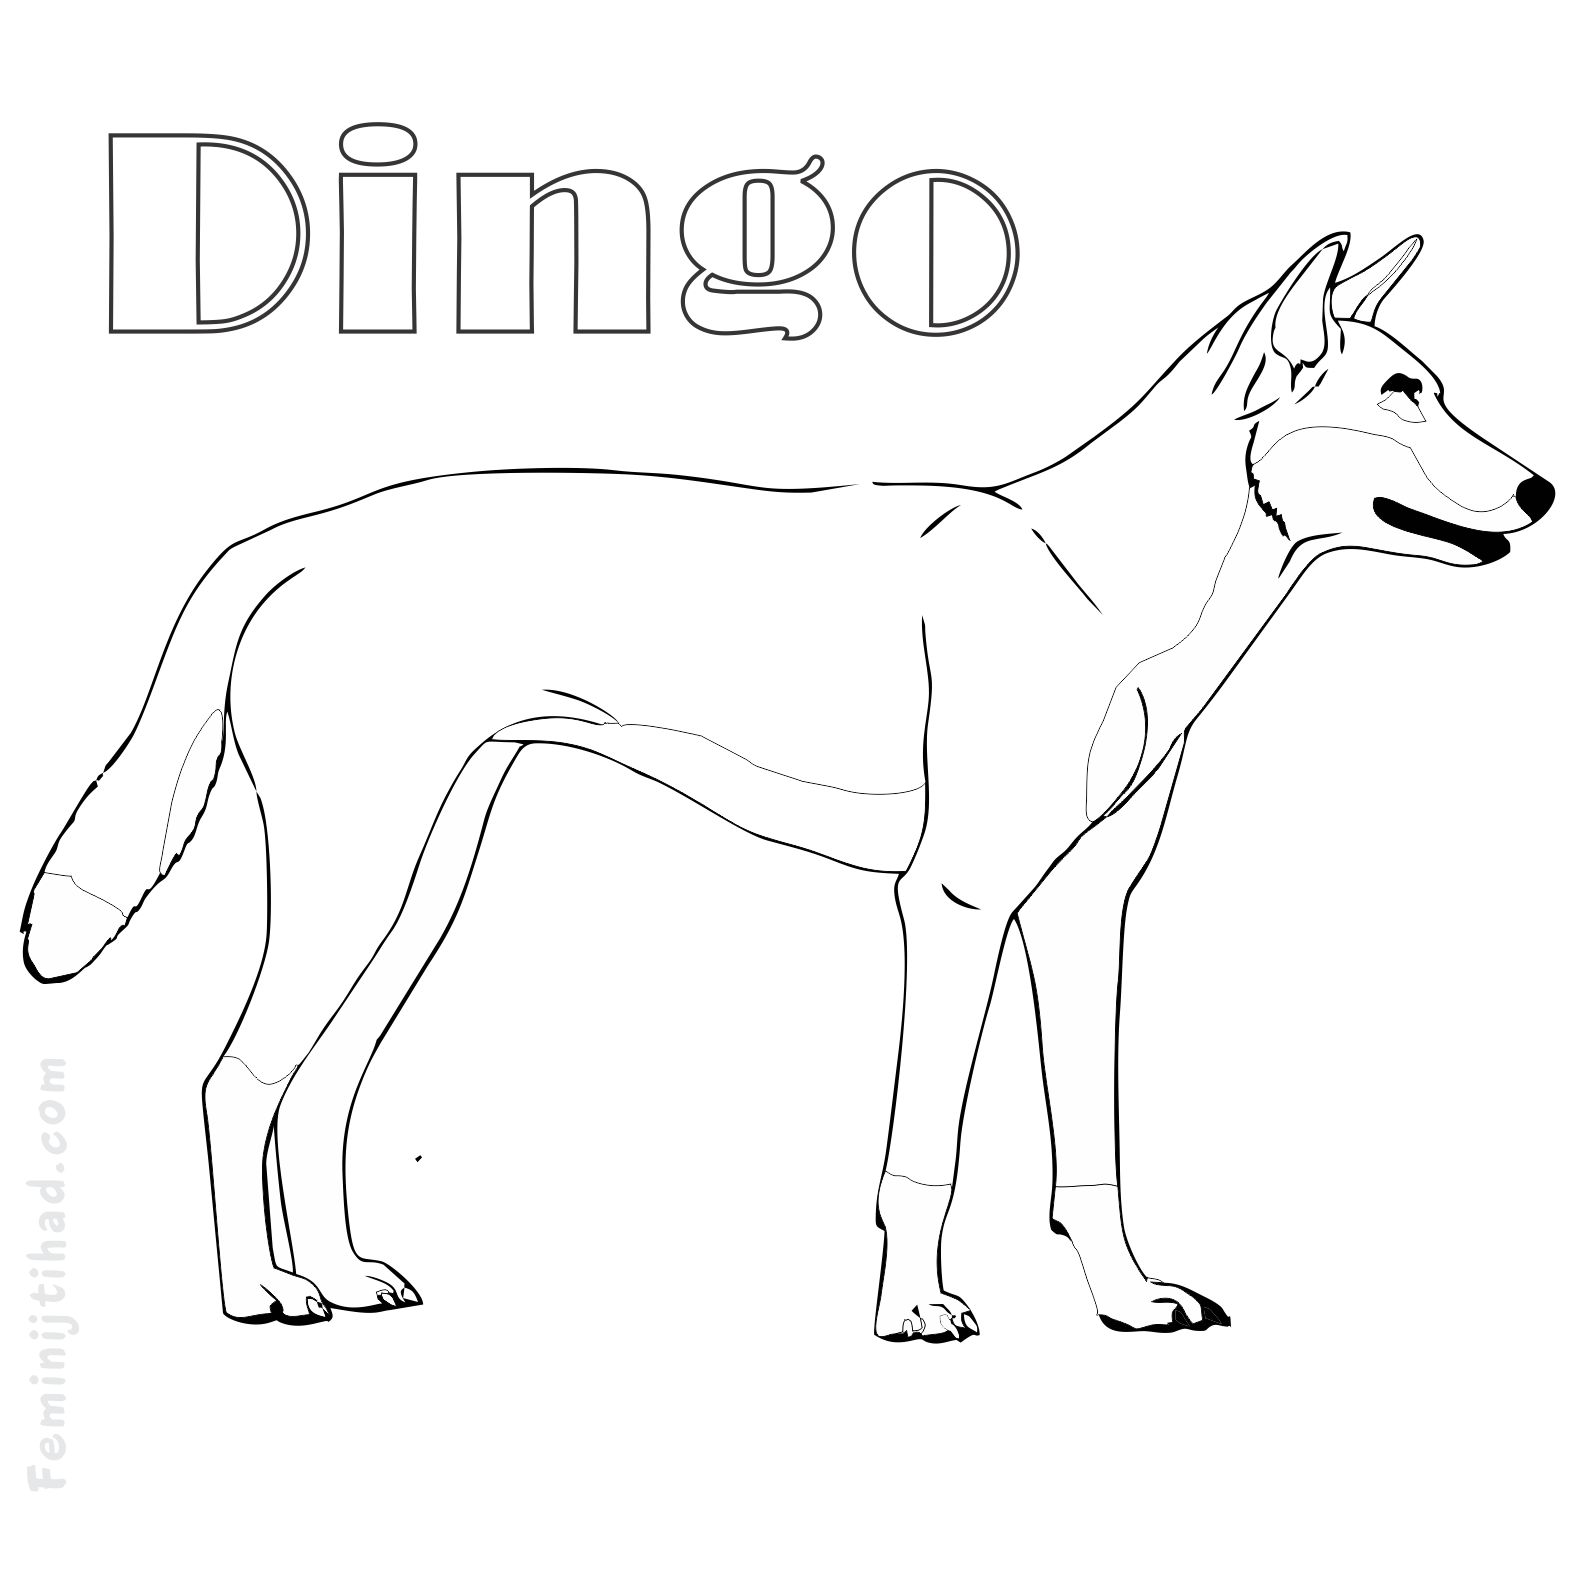 coloring page of a dingo free